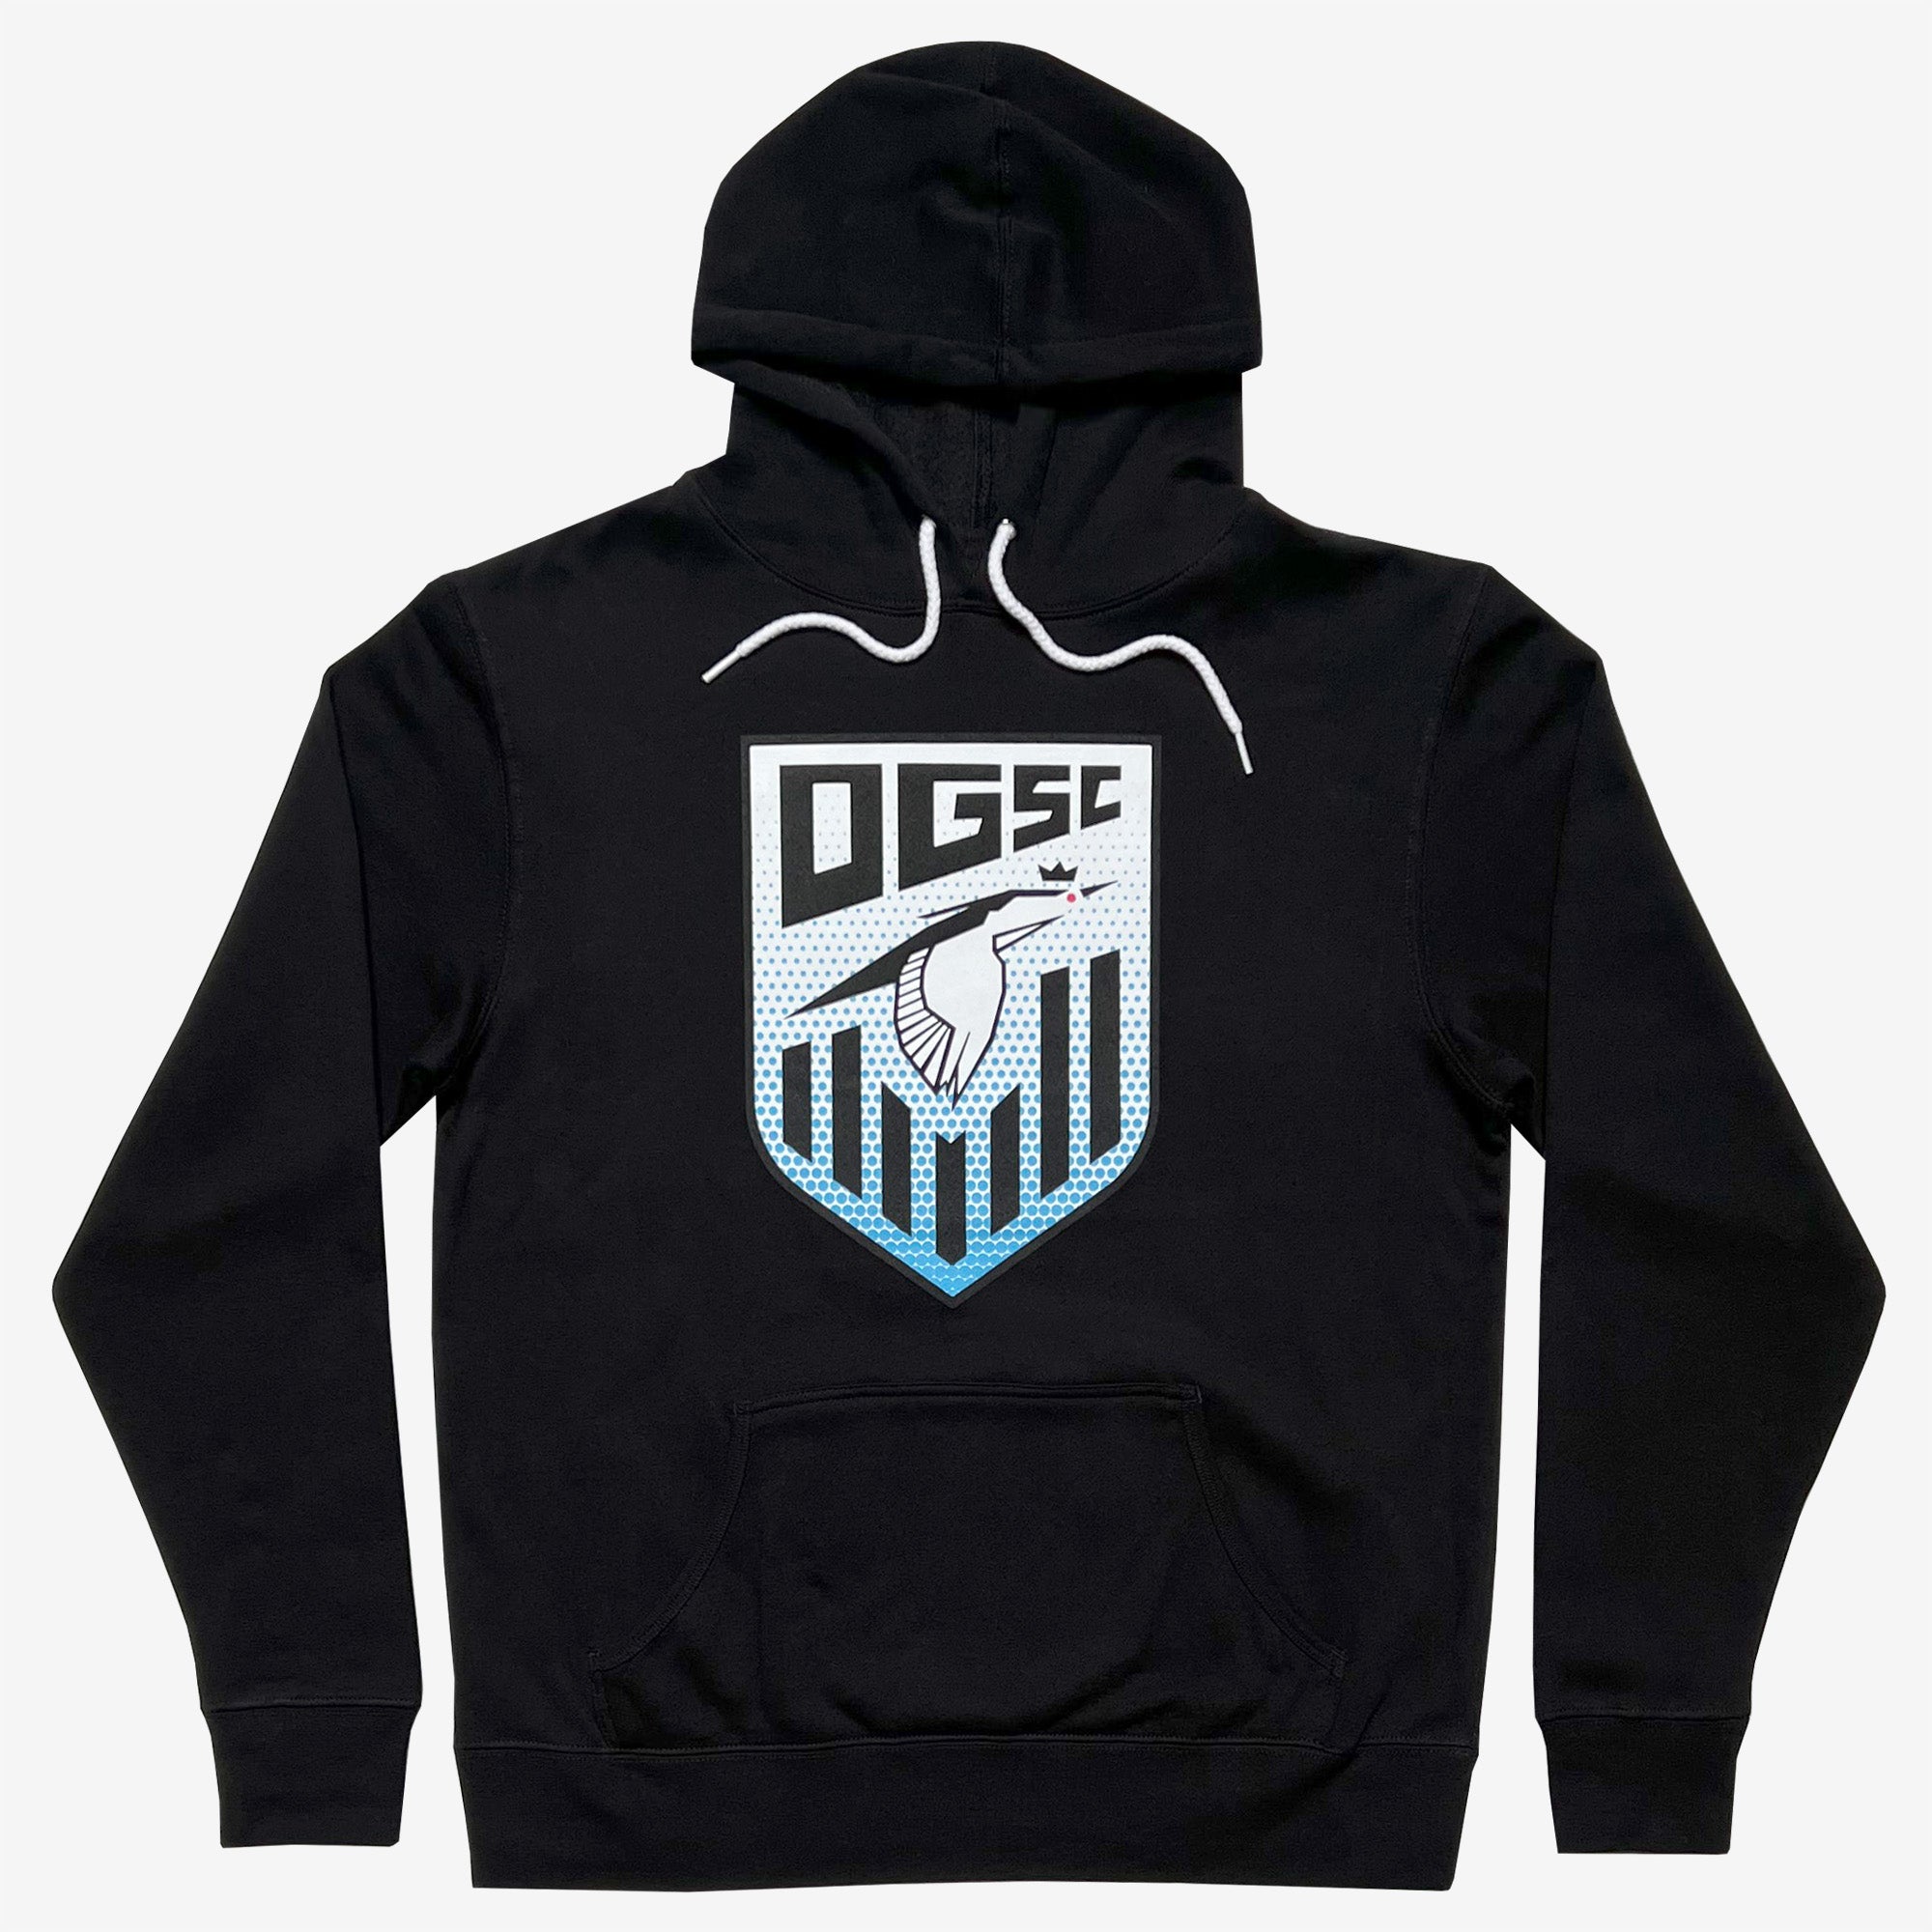 Black pullover hoodie with Oakland Genesis soccer league heron logo on chest.